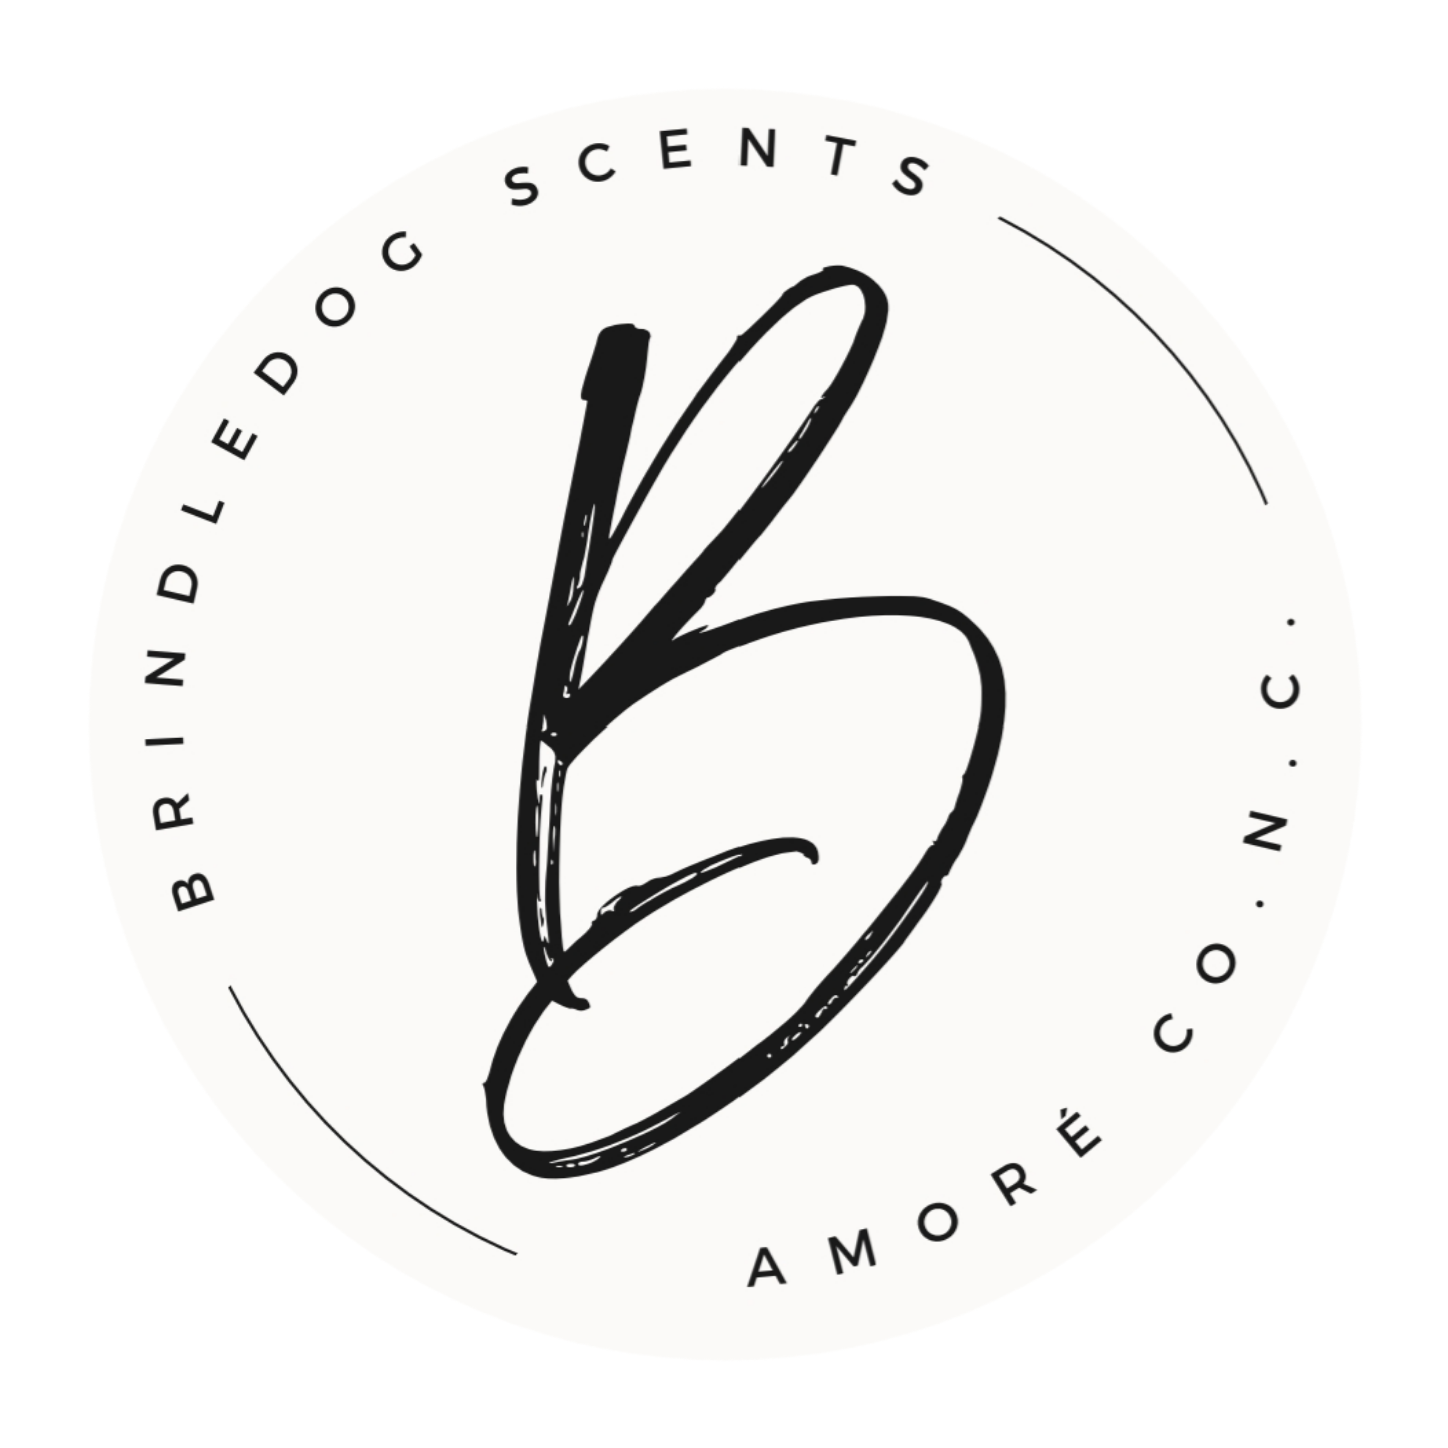 Brindledog Scents Amore Co. Handcrafted Soap, Candles & More